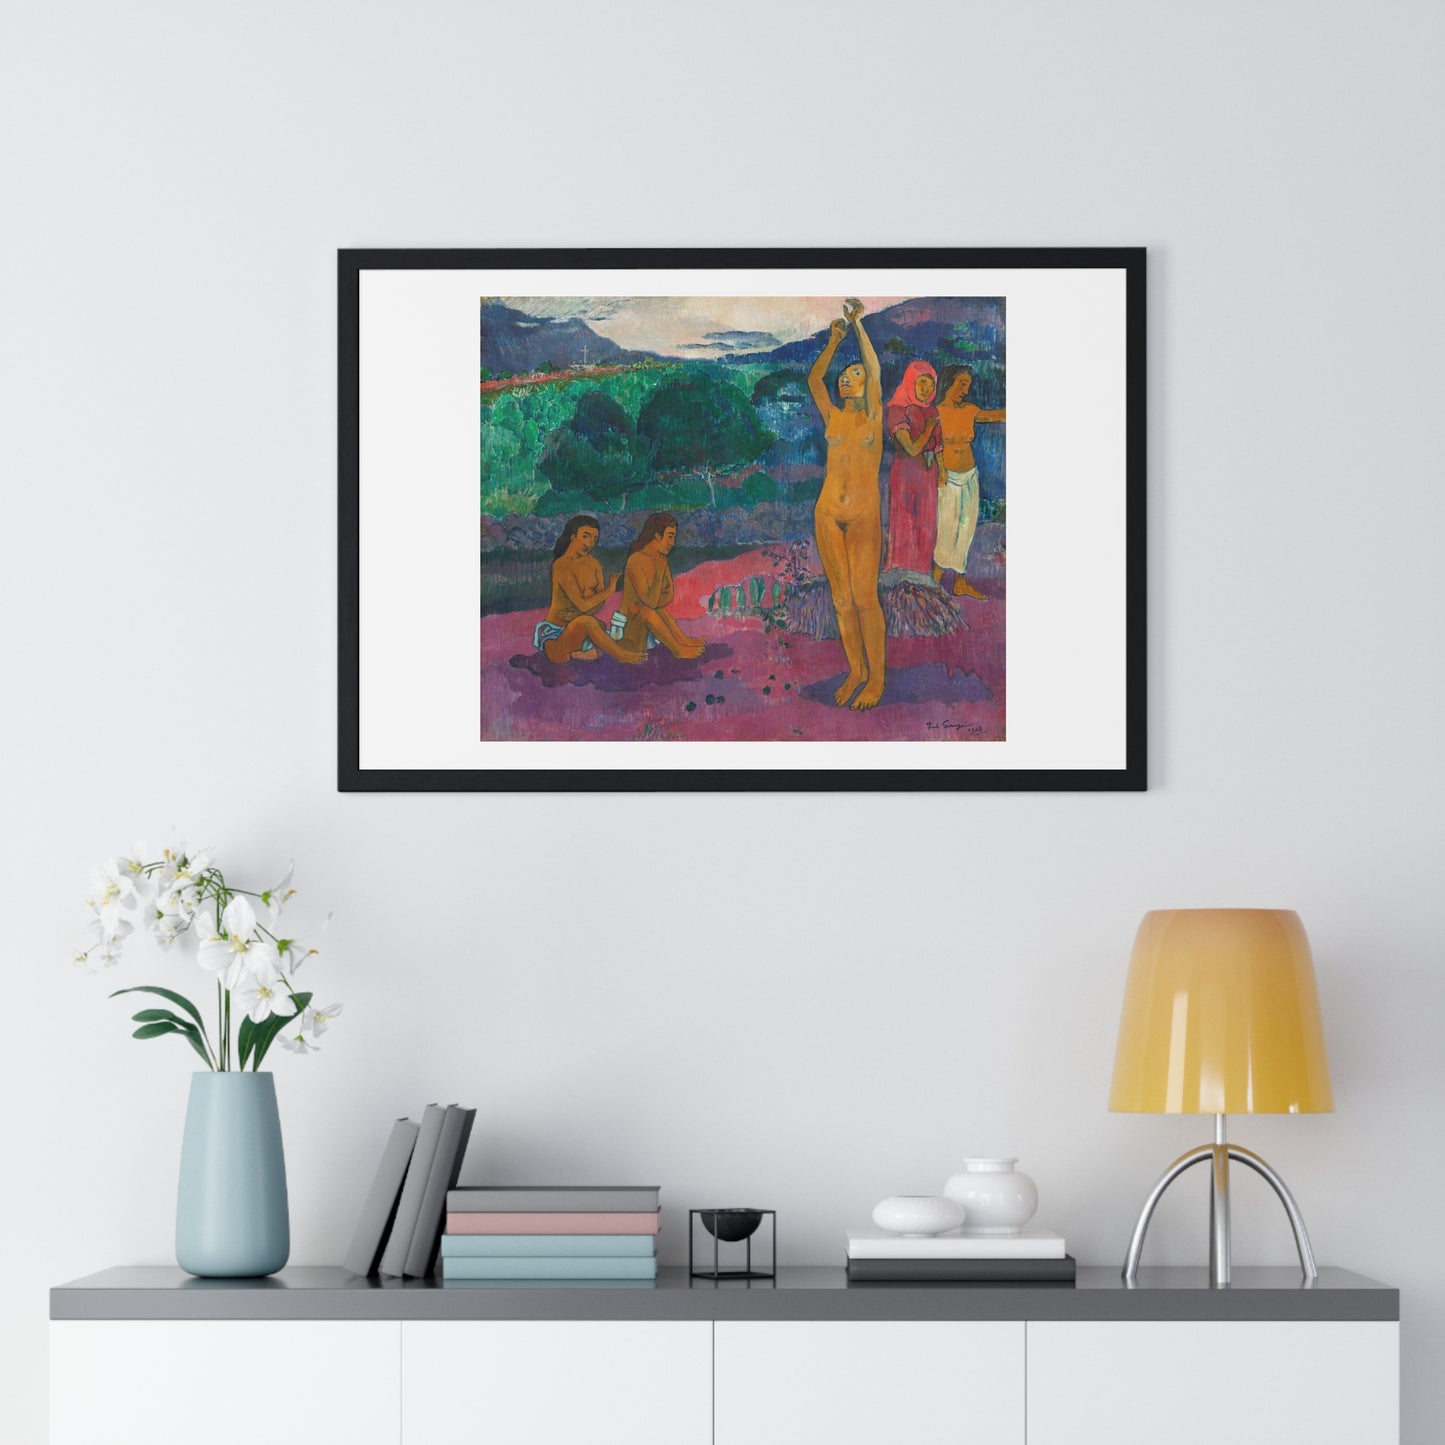 The Invocation (1903) by Paul Gauguin, from the Original, Framed Print